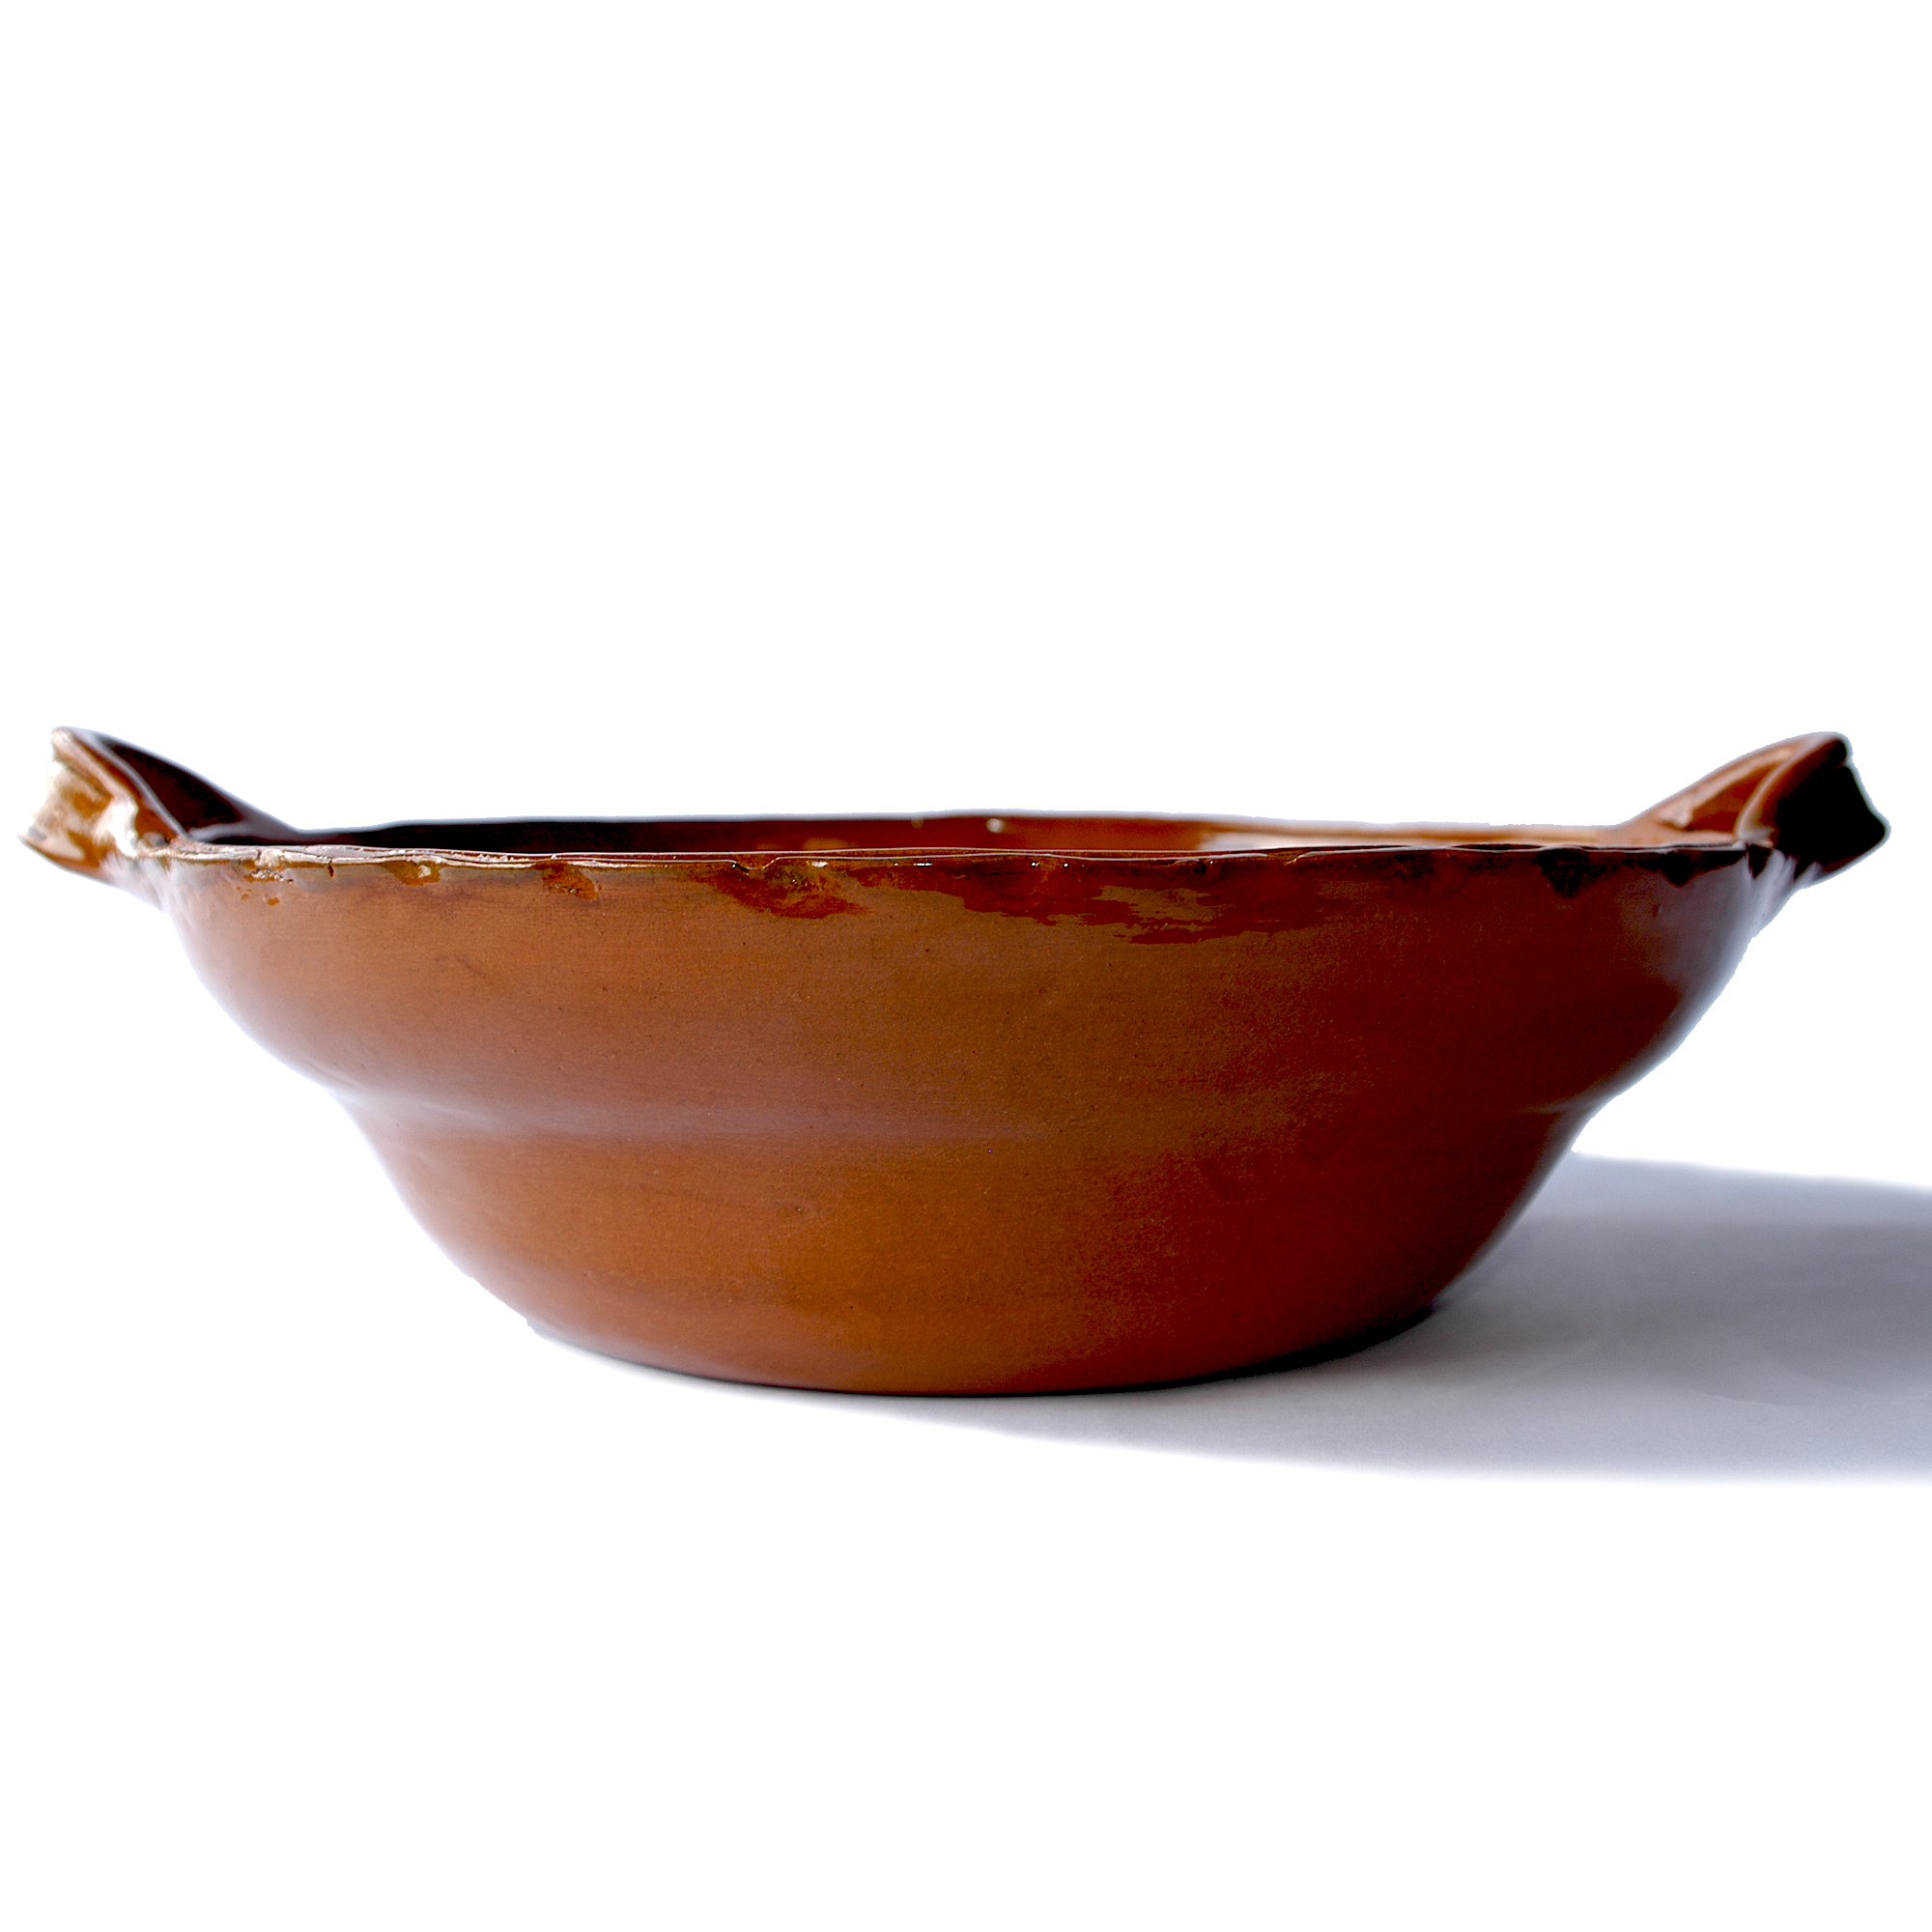 https://ancientcookware.com/images/stories/virtuemart/product/mex_3040_14_03_large.jpg